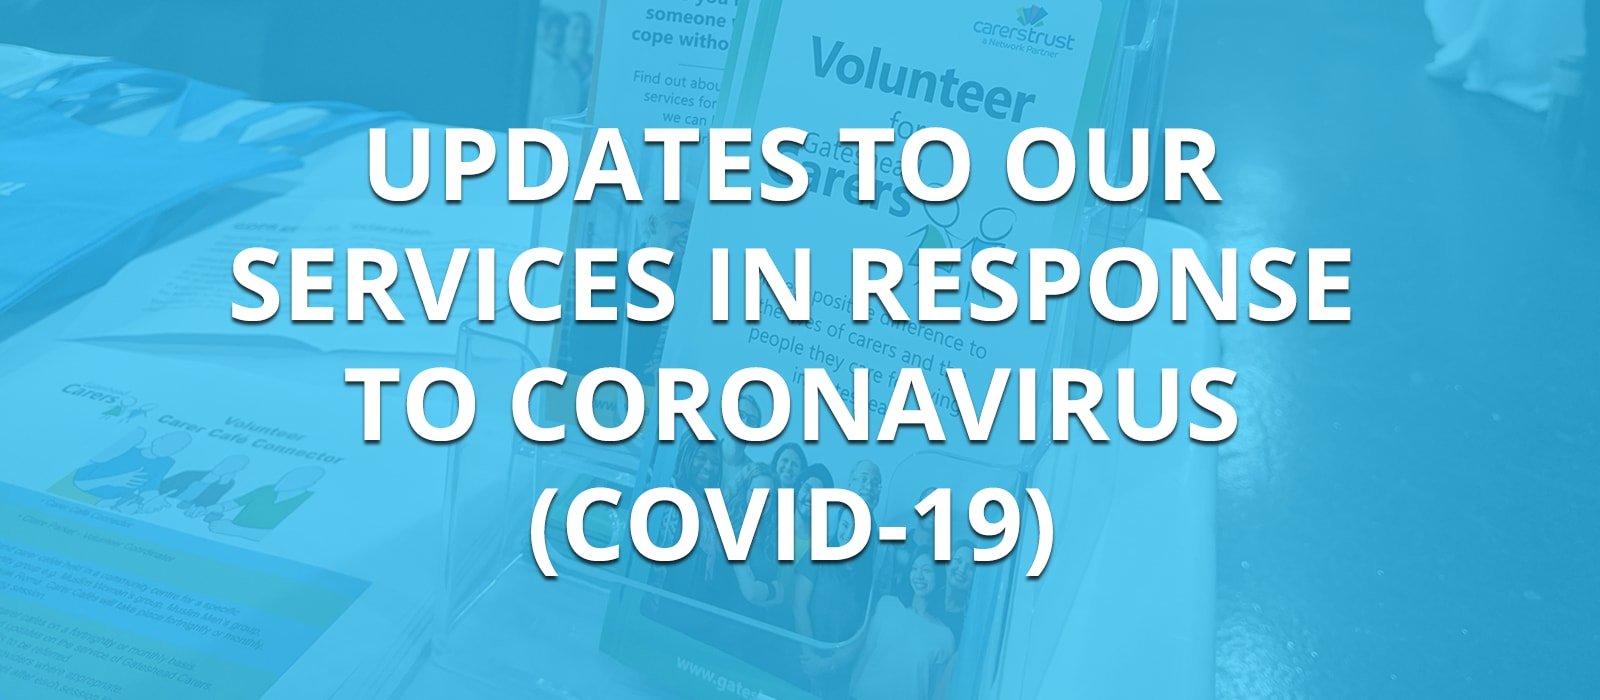 An update to our services in response to Coronavirus (COVID-19)